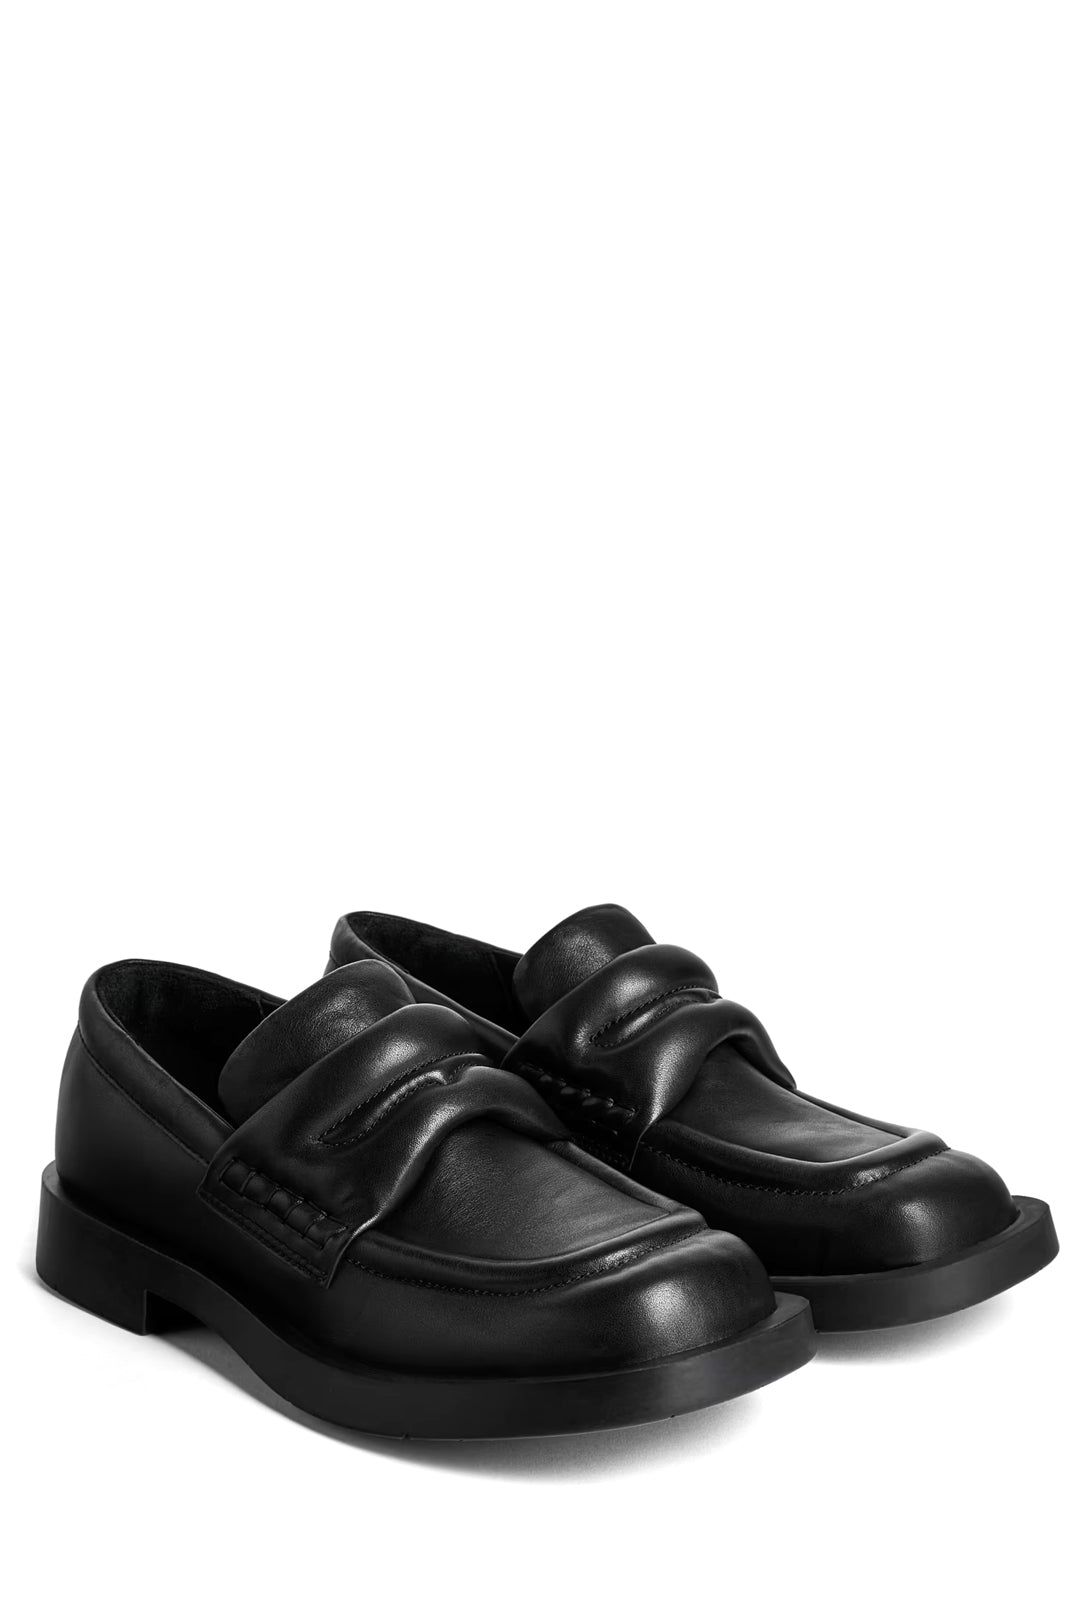 CamperLab MIL 1978 Puffy Loafers, Black